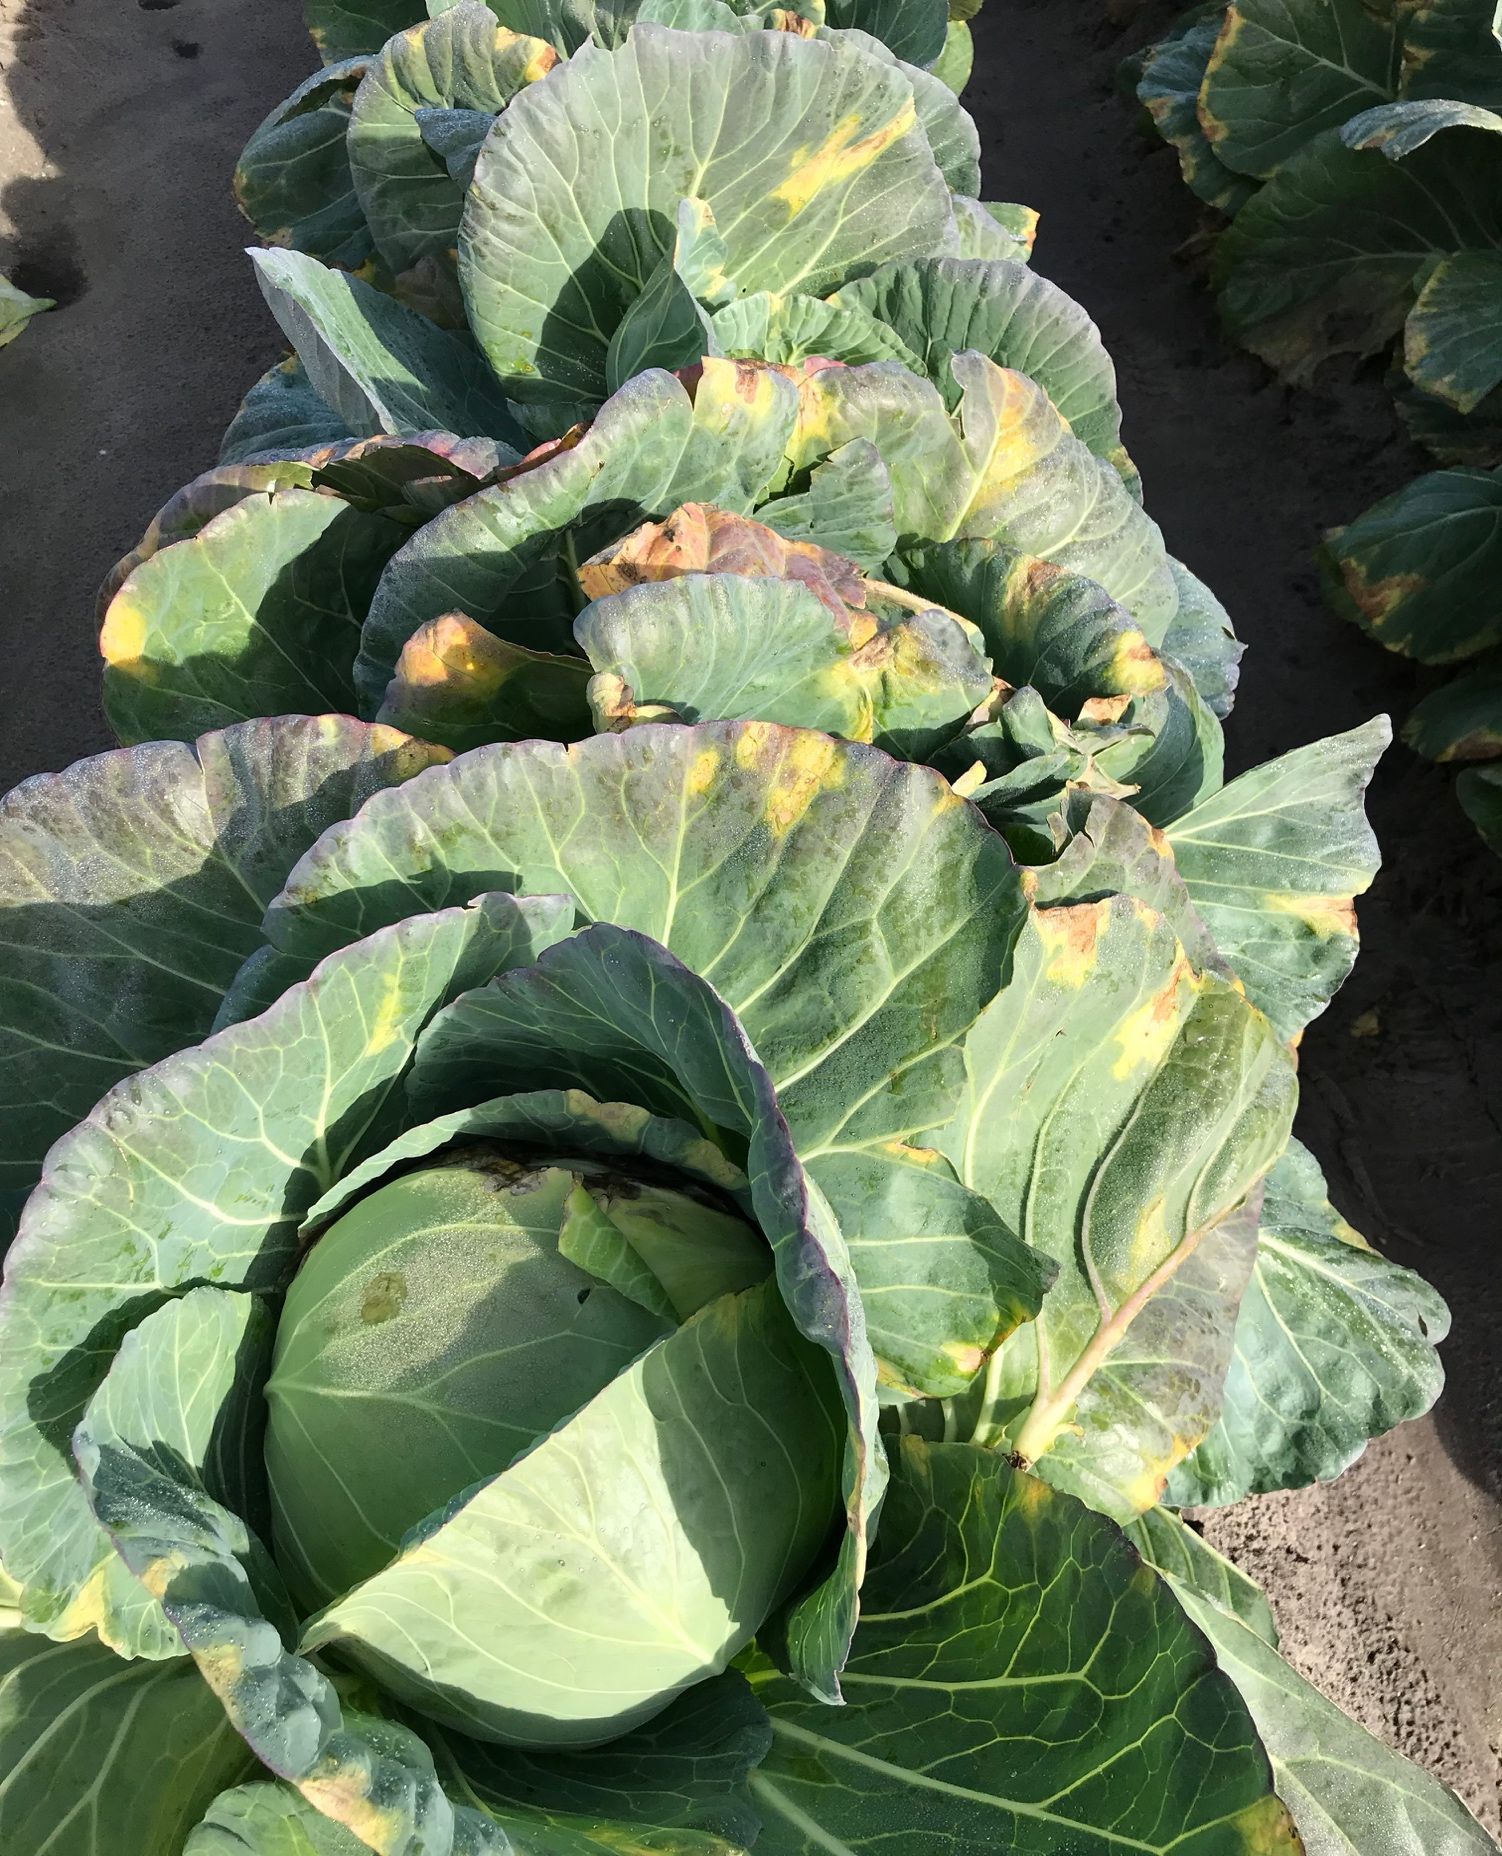 Bacterial rot in cabbage caused by Xanthomonas campestris pv campestris.